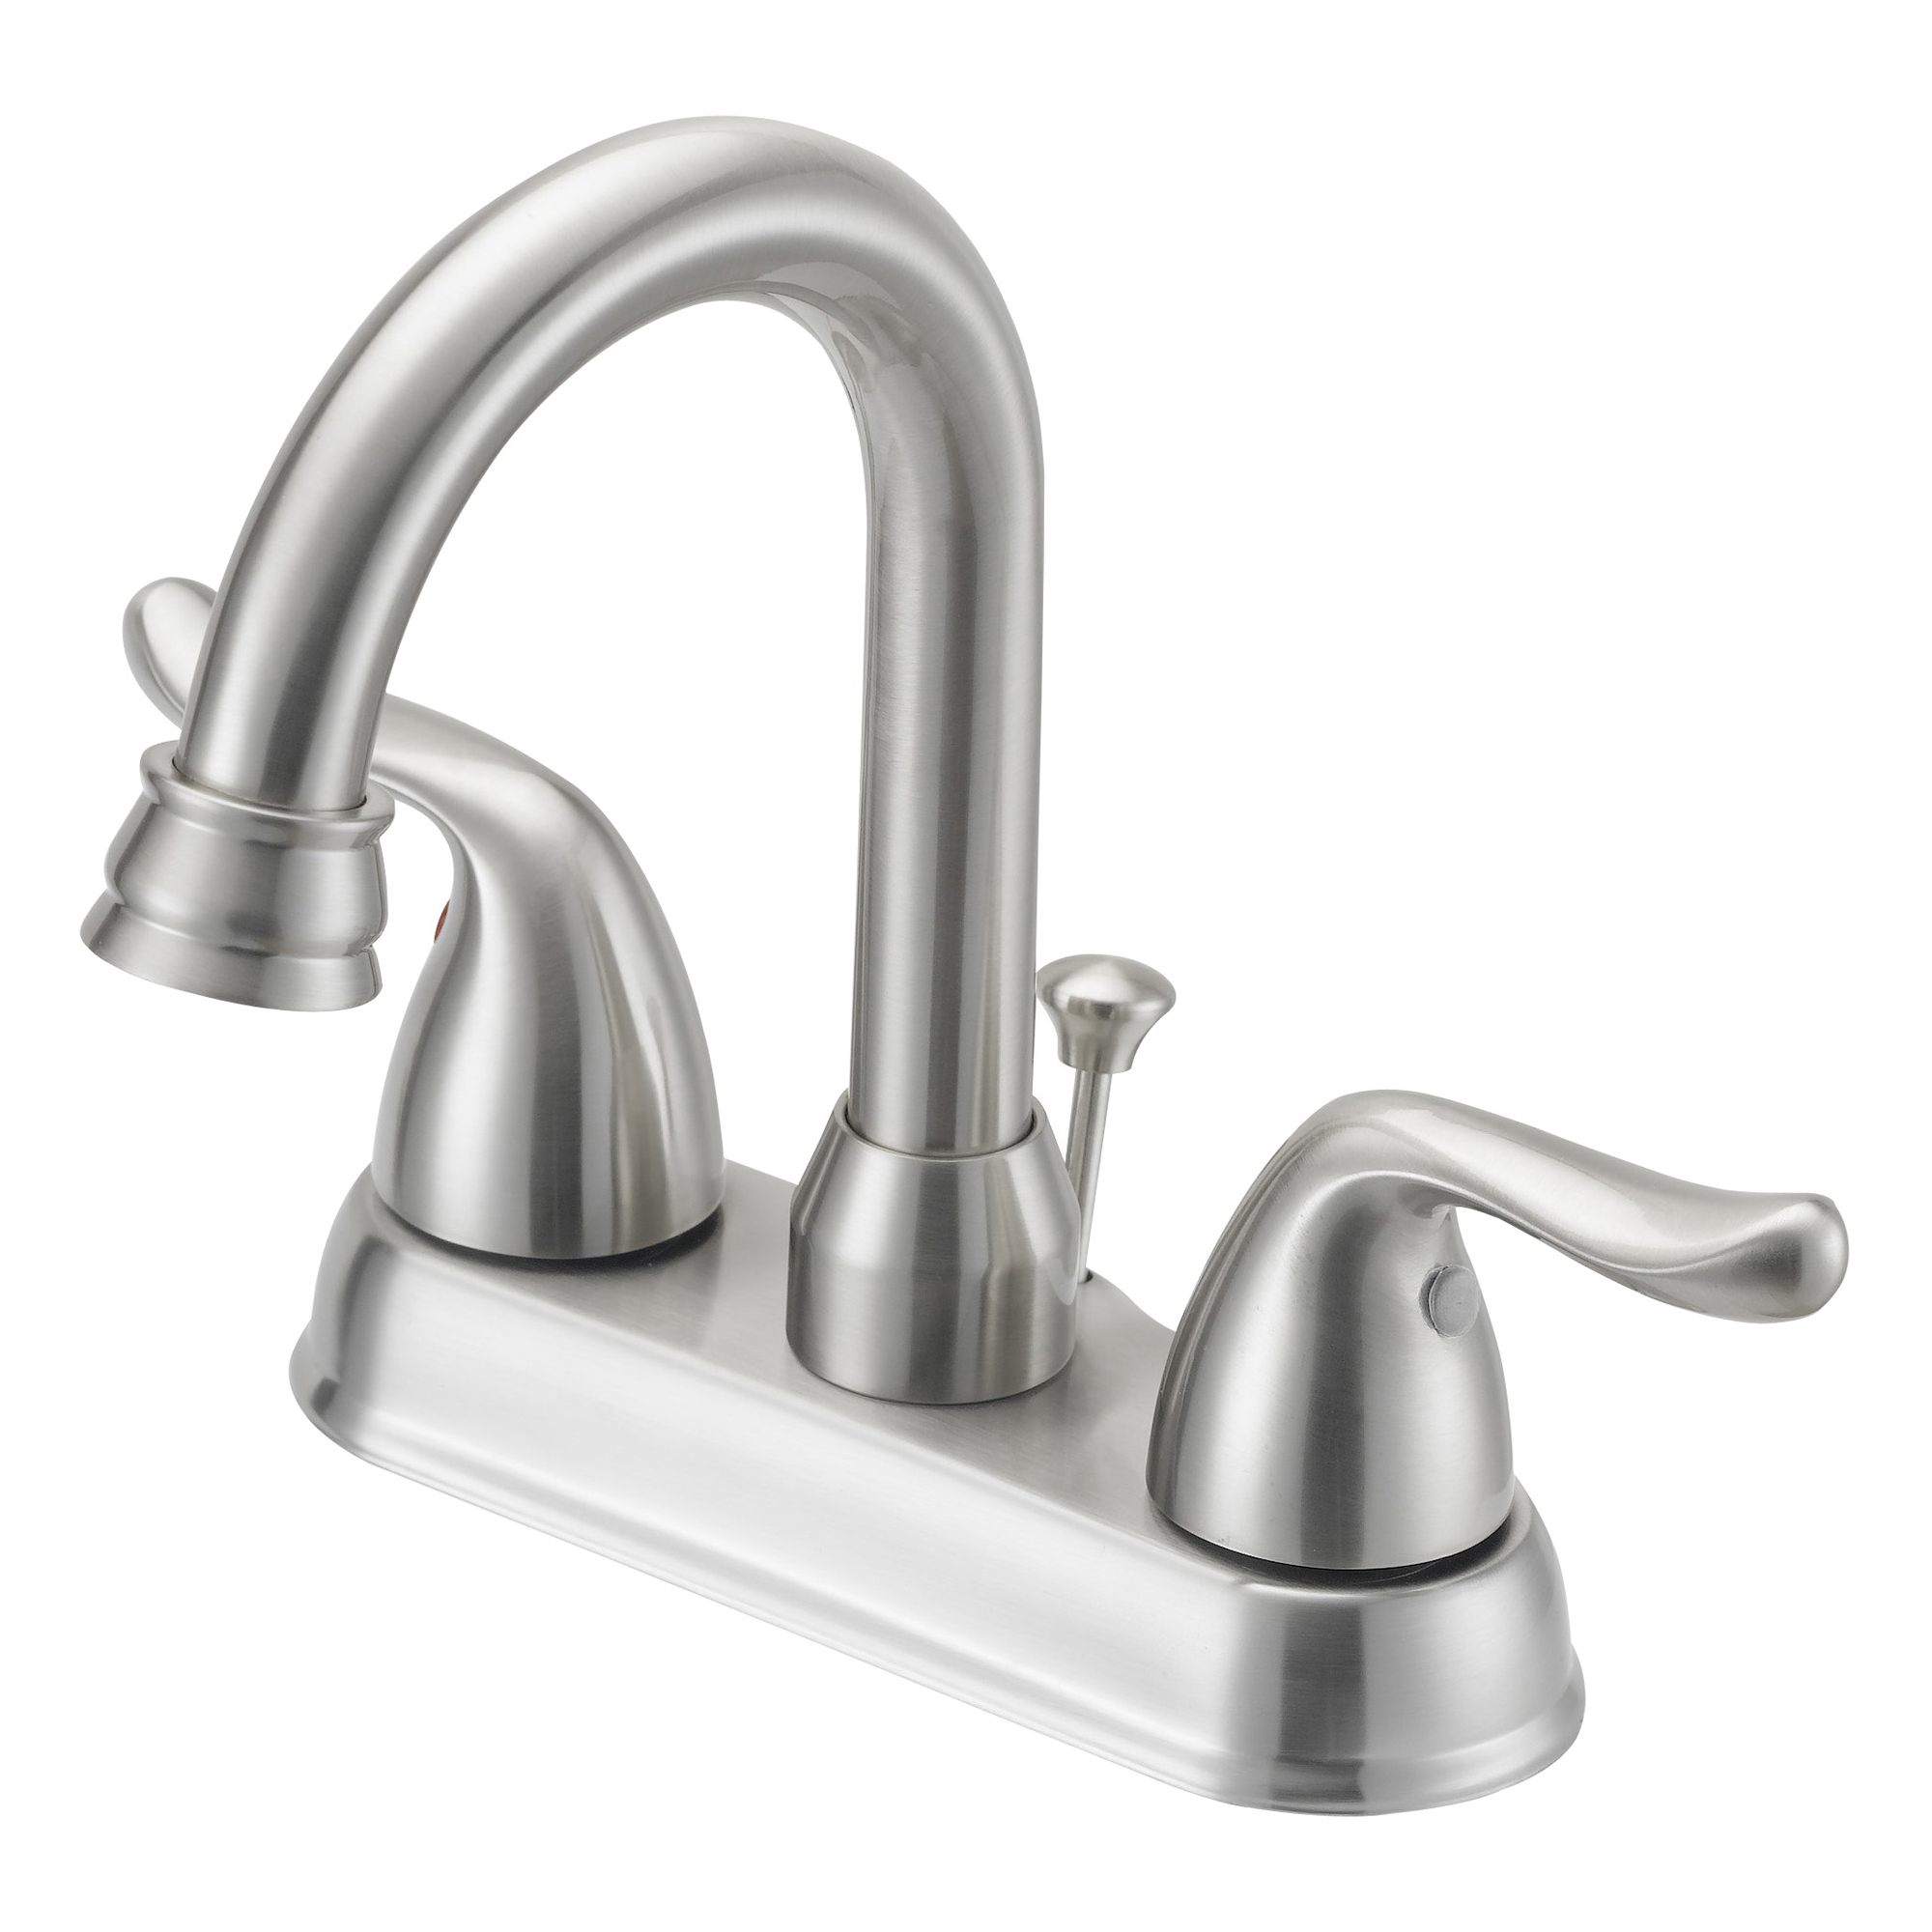 TQ-5111080NP Lavatory Faucet, 1.2 gpm, 2-Faucet Handle, 3-Faucet Hole, Metal/Plastic, Brushed Nickel